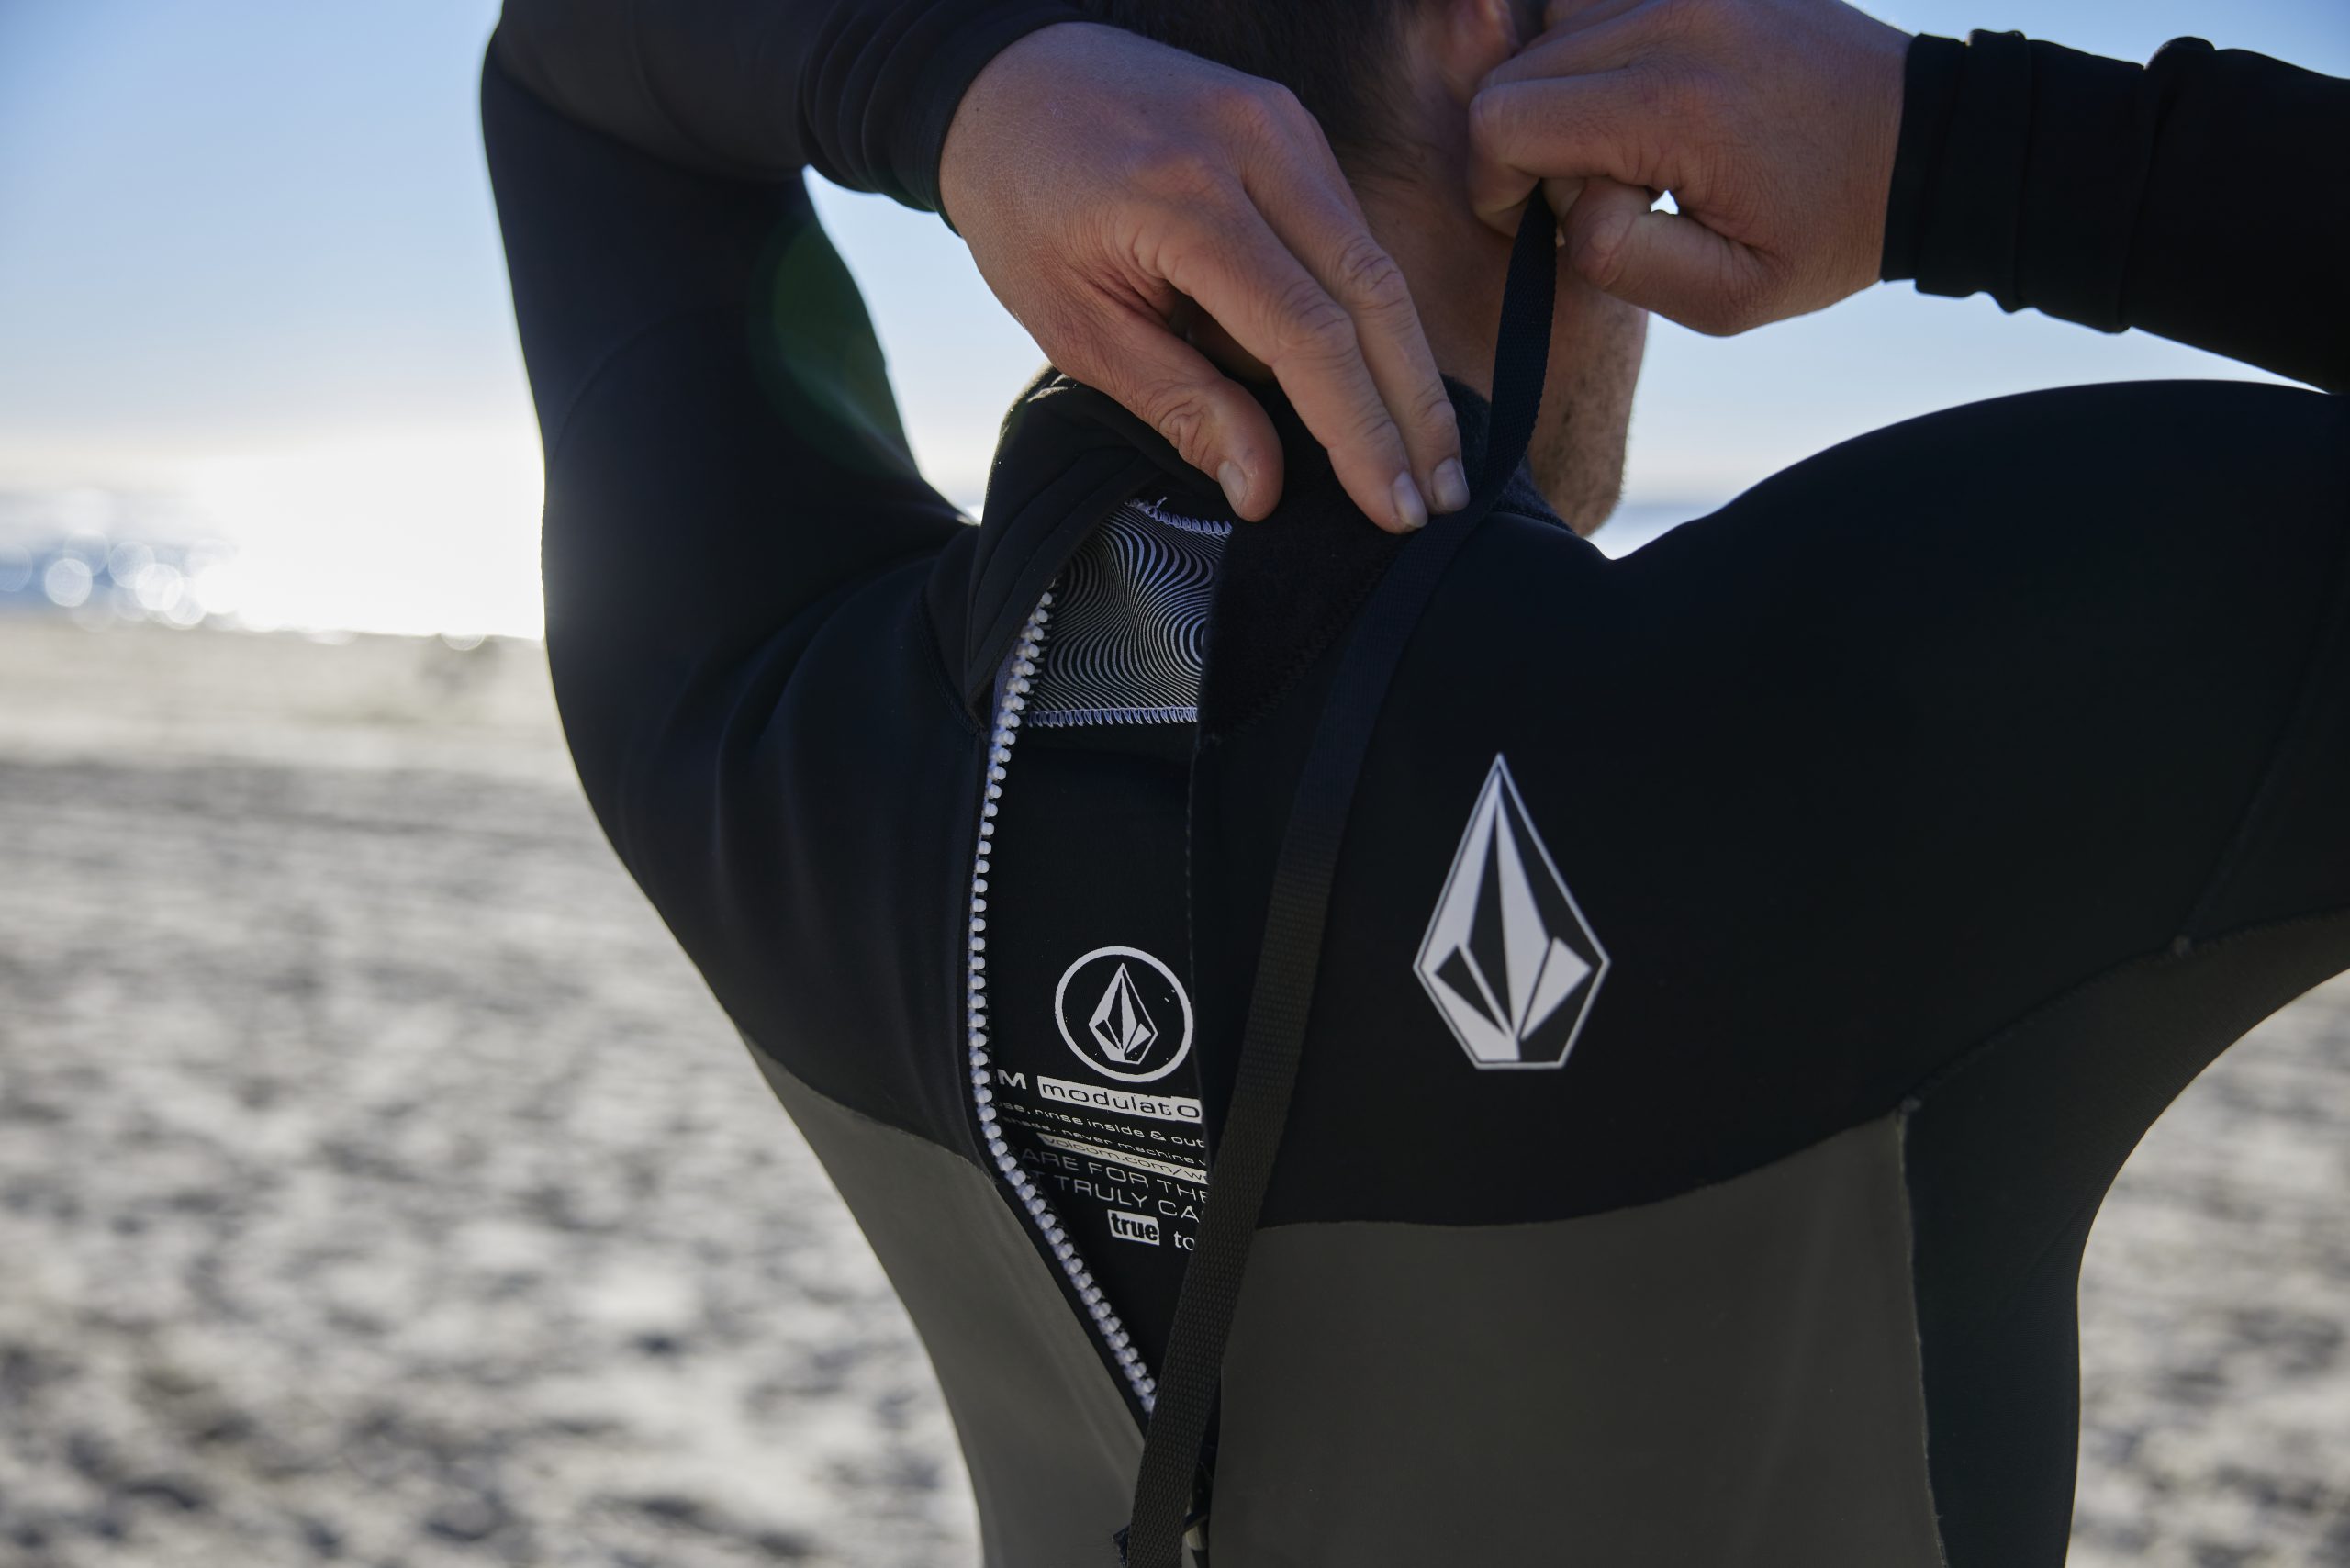 Volcom S/S 22 Wetsuits Preview